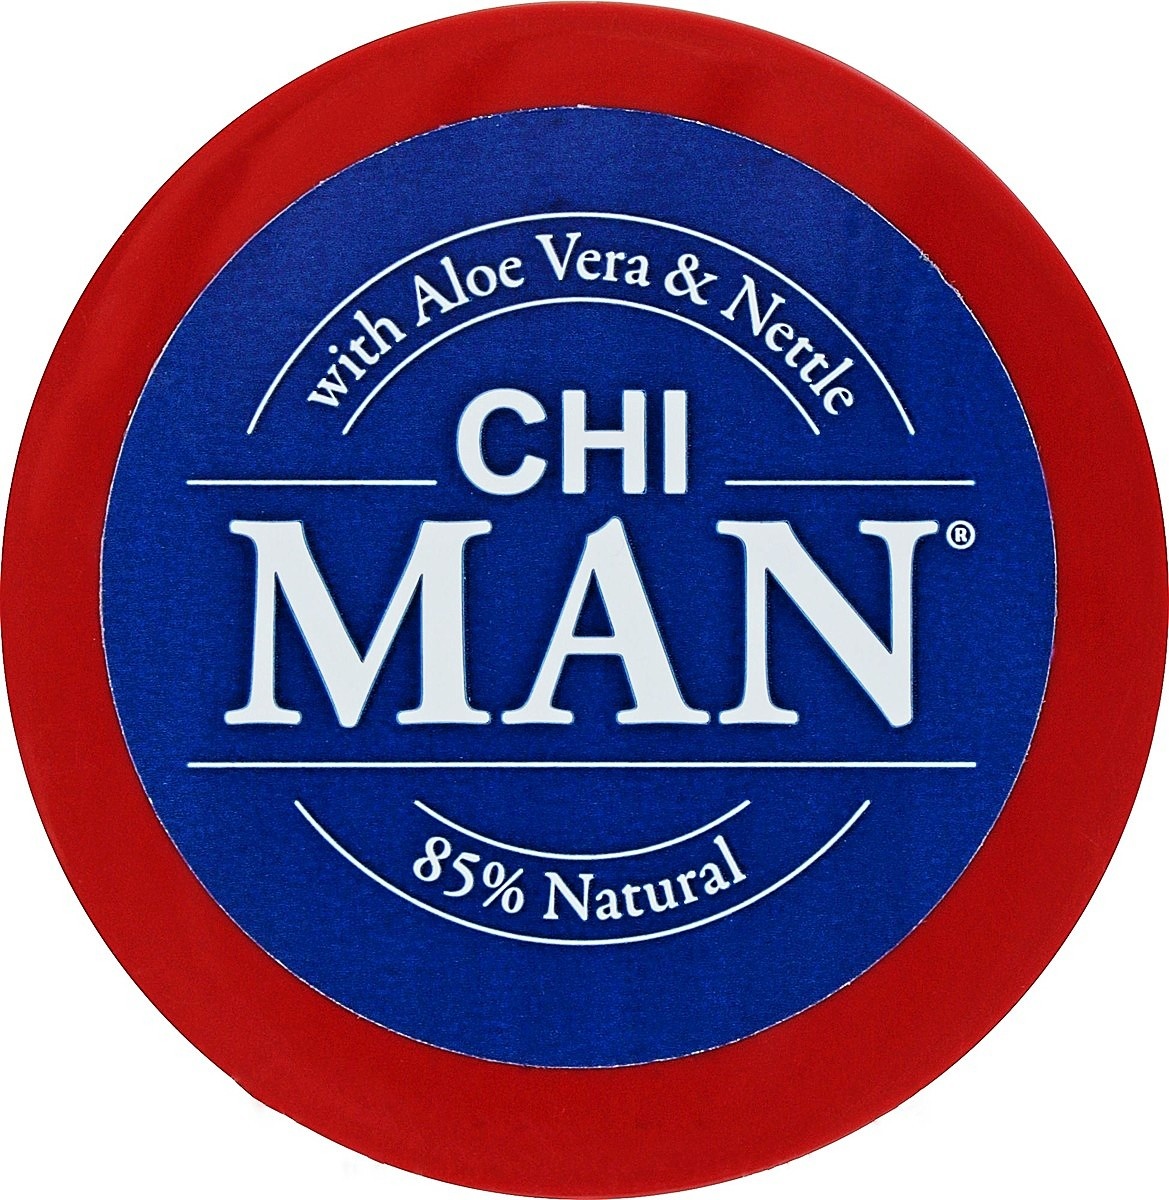 CHI Man - Palm Of Your Hand - Pomade - 85 gr